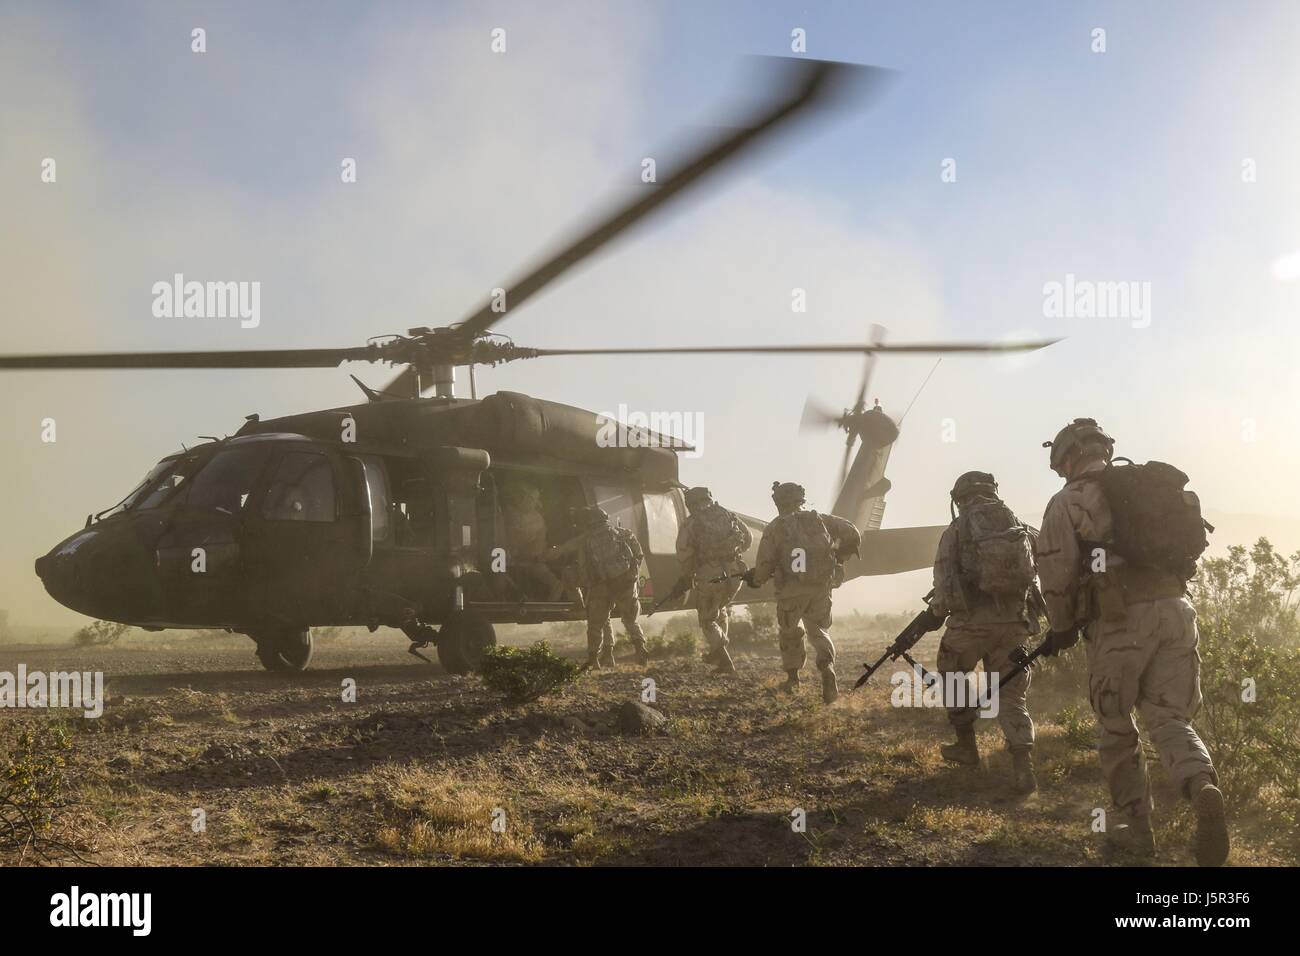 U.S. soldiers load into a U.S. Army UH-60 Black Hawk utility helicopter during a training exercise at the National Training Center May 4, 2017 in Fort Irwin, California.    (photo by Austin Anyzeski /US Army  via Planetpix) Stock Photo